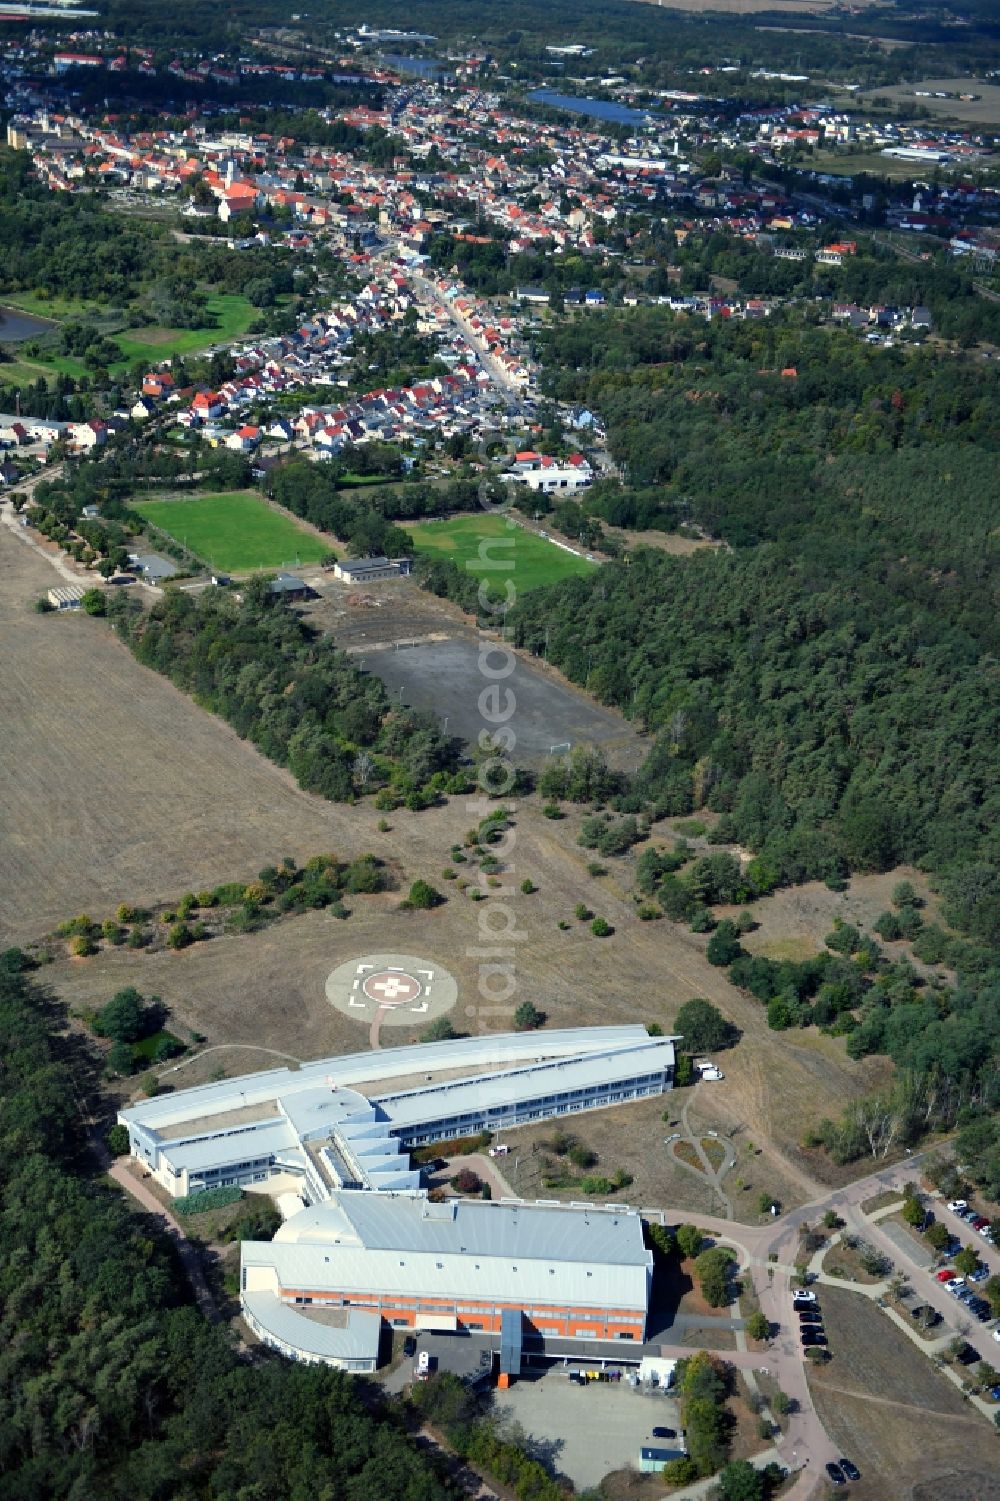 Coswig (Anhalt) from the bird's eye view: Hospital grounds of the Clinic MediClin Herzzentrum Coswig Lerchenfeld in the district Dueben in Coswig (Anhalt) in the state Saxony-Anhalt, Germany